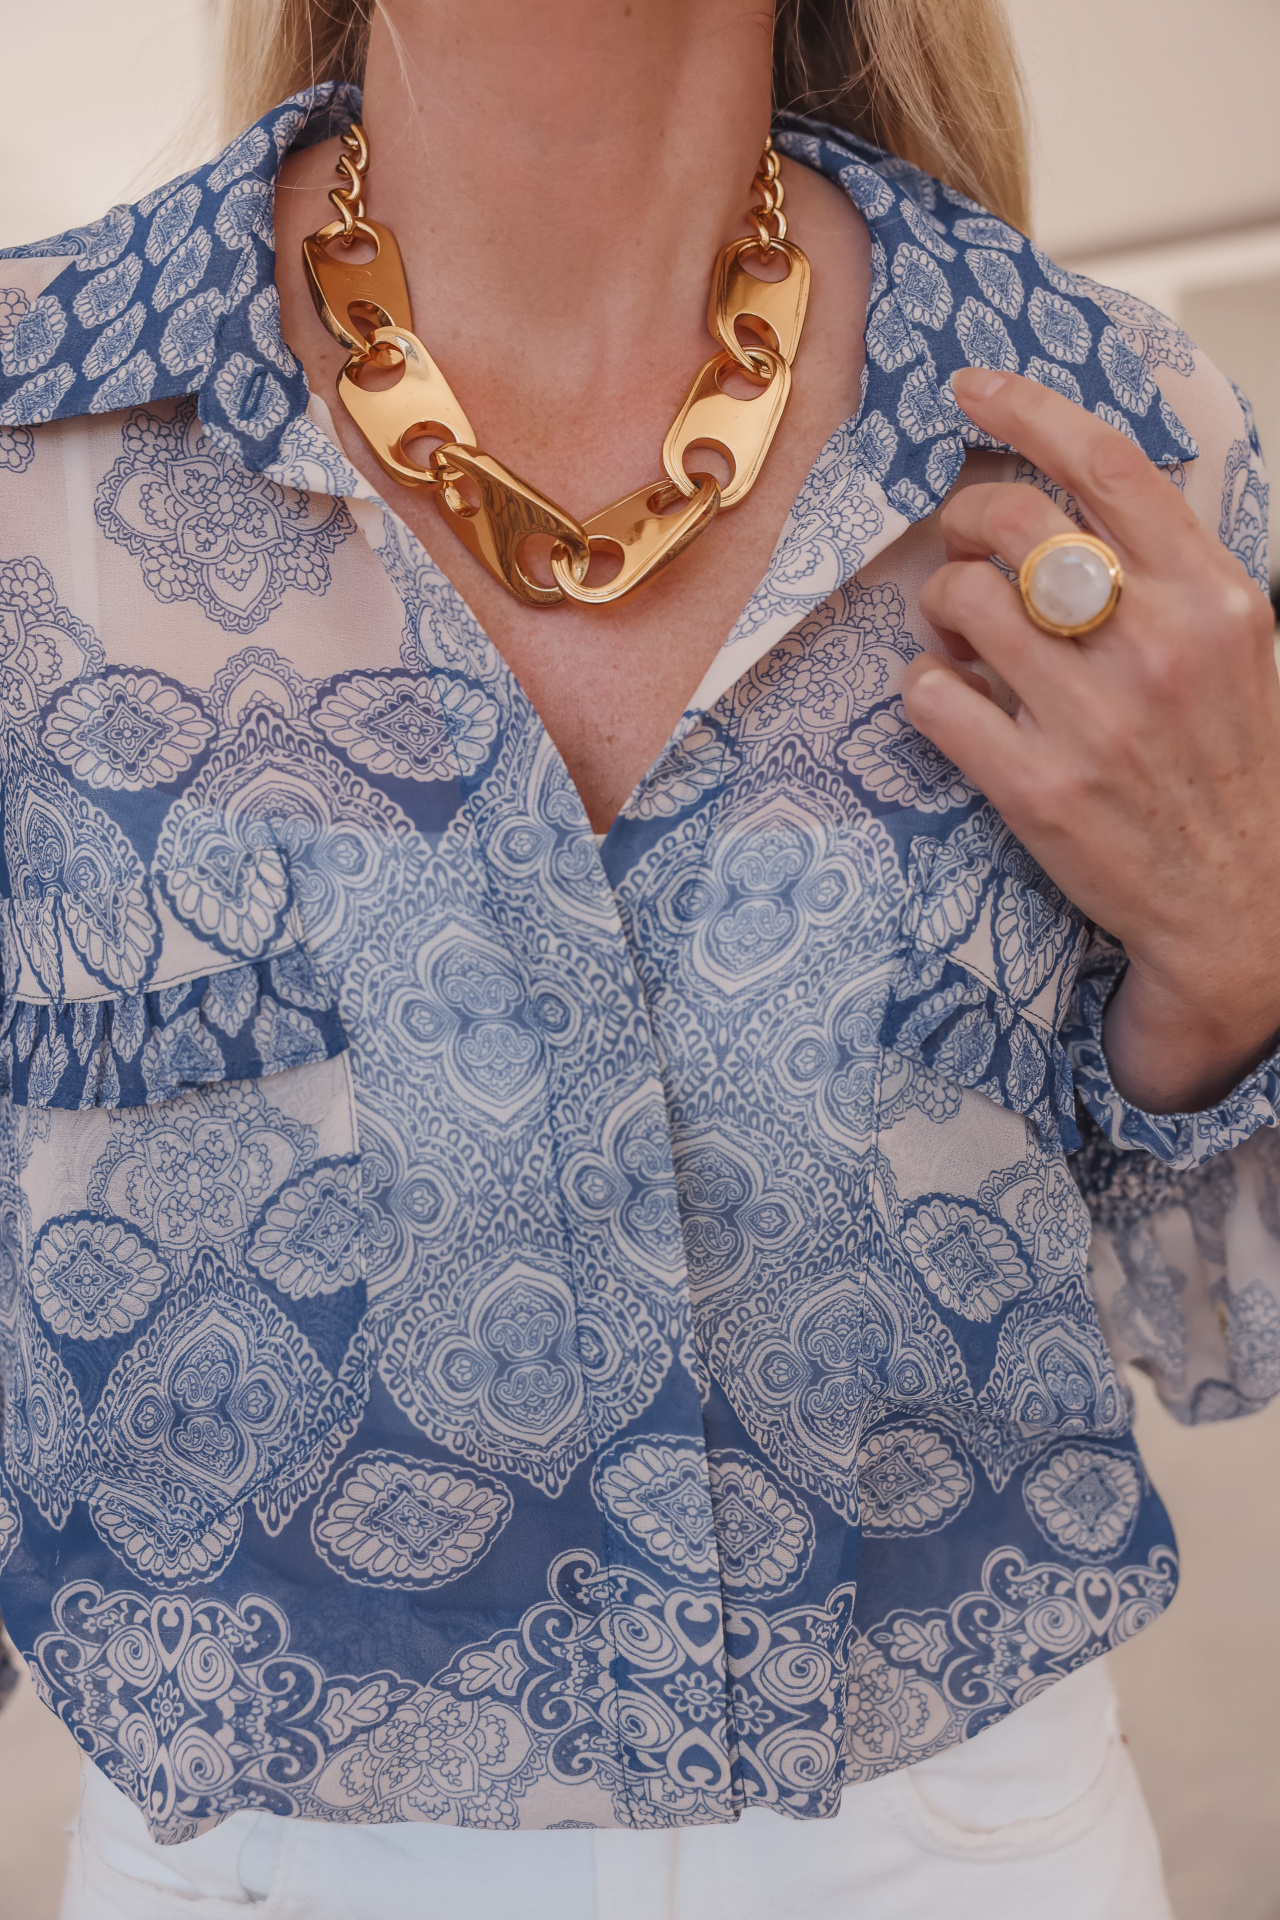 dean davidson moon stone signet ring, paco rabbane gold chain link necklace, misa los angeles nora top, erin busbsee fashion blogger over 40, telluride, co